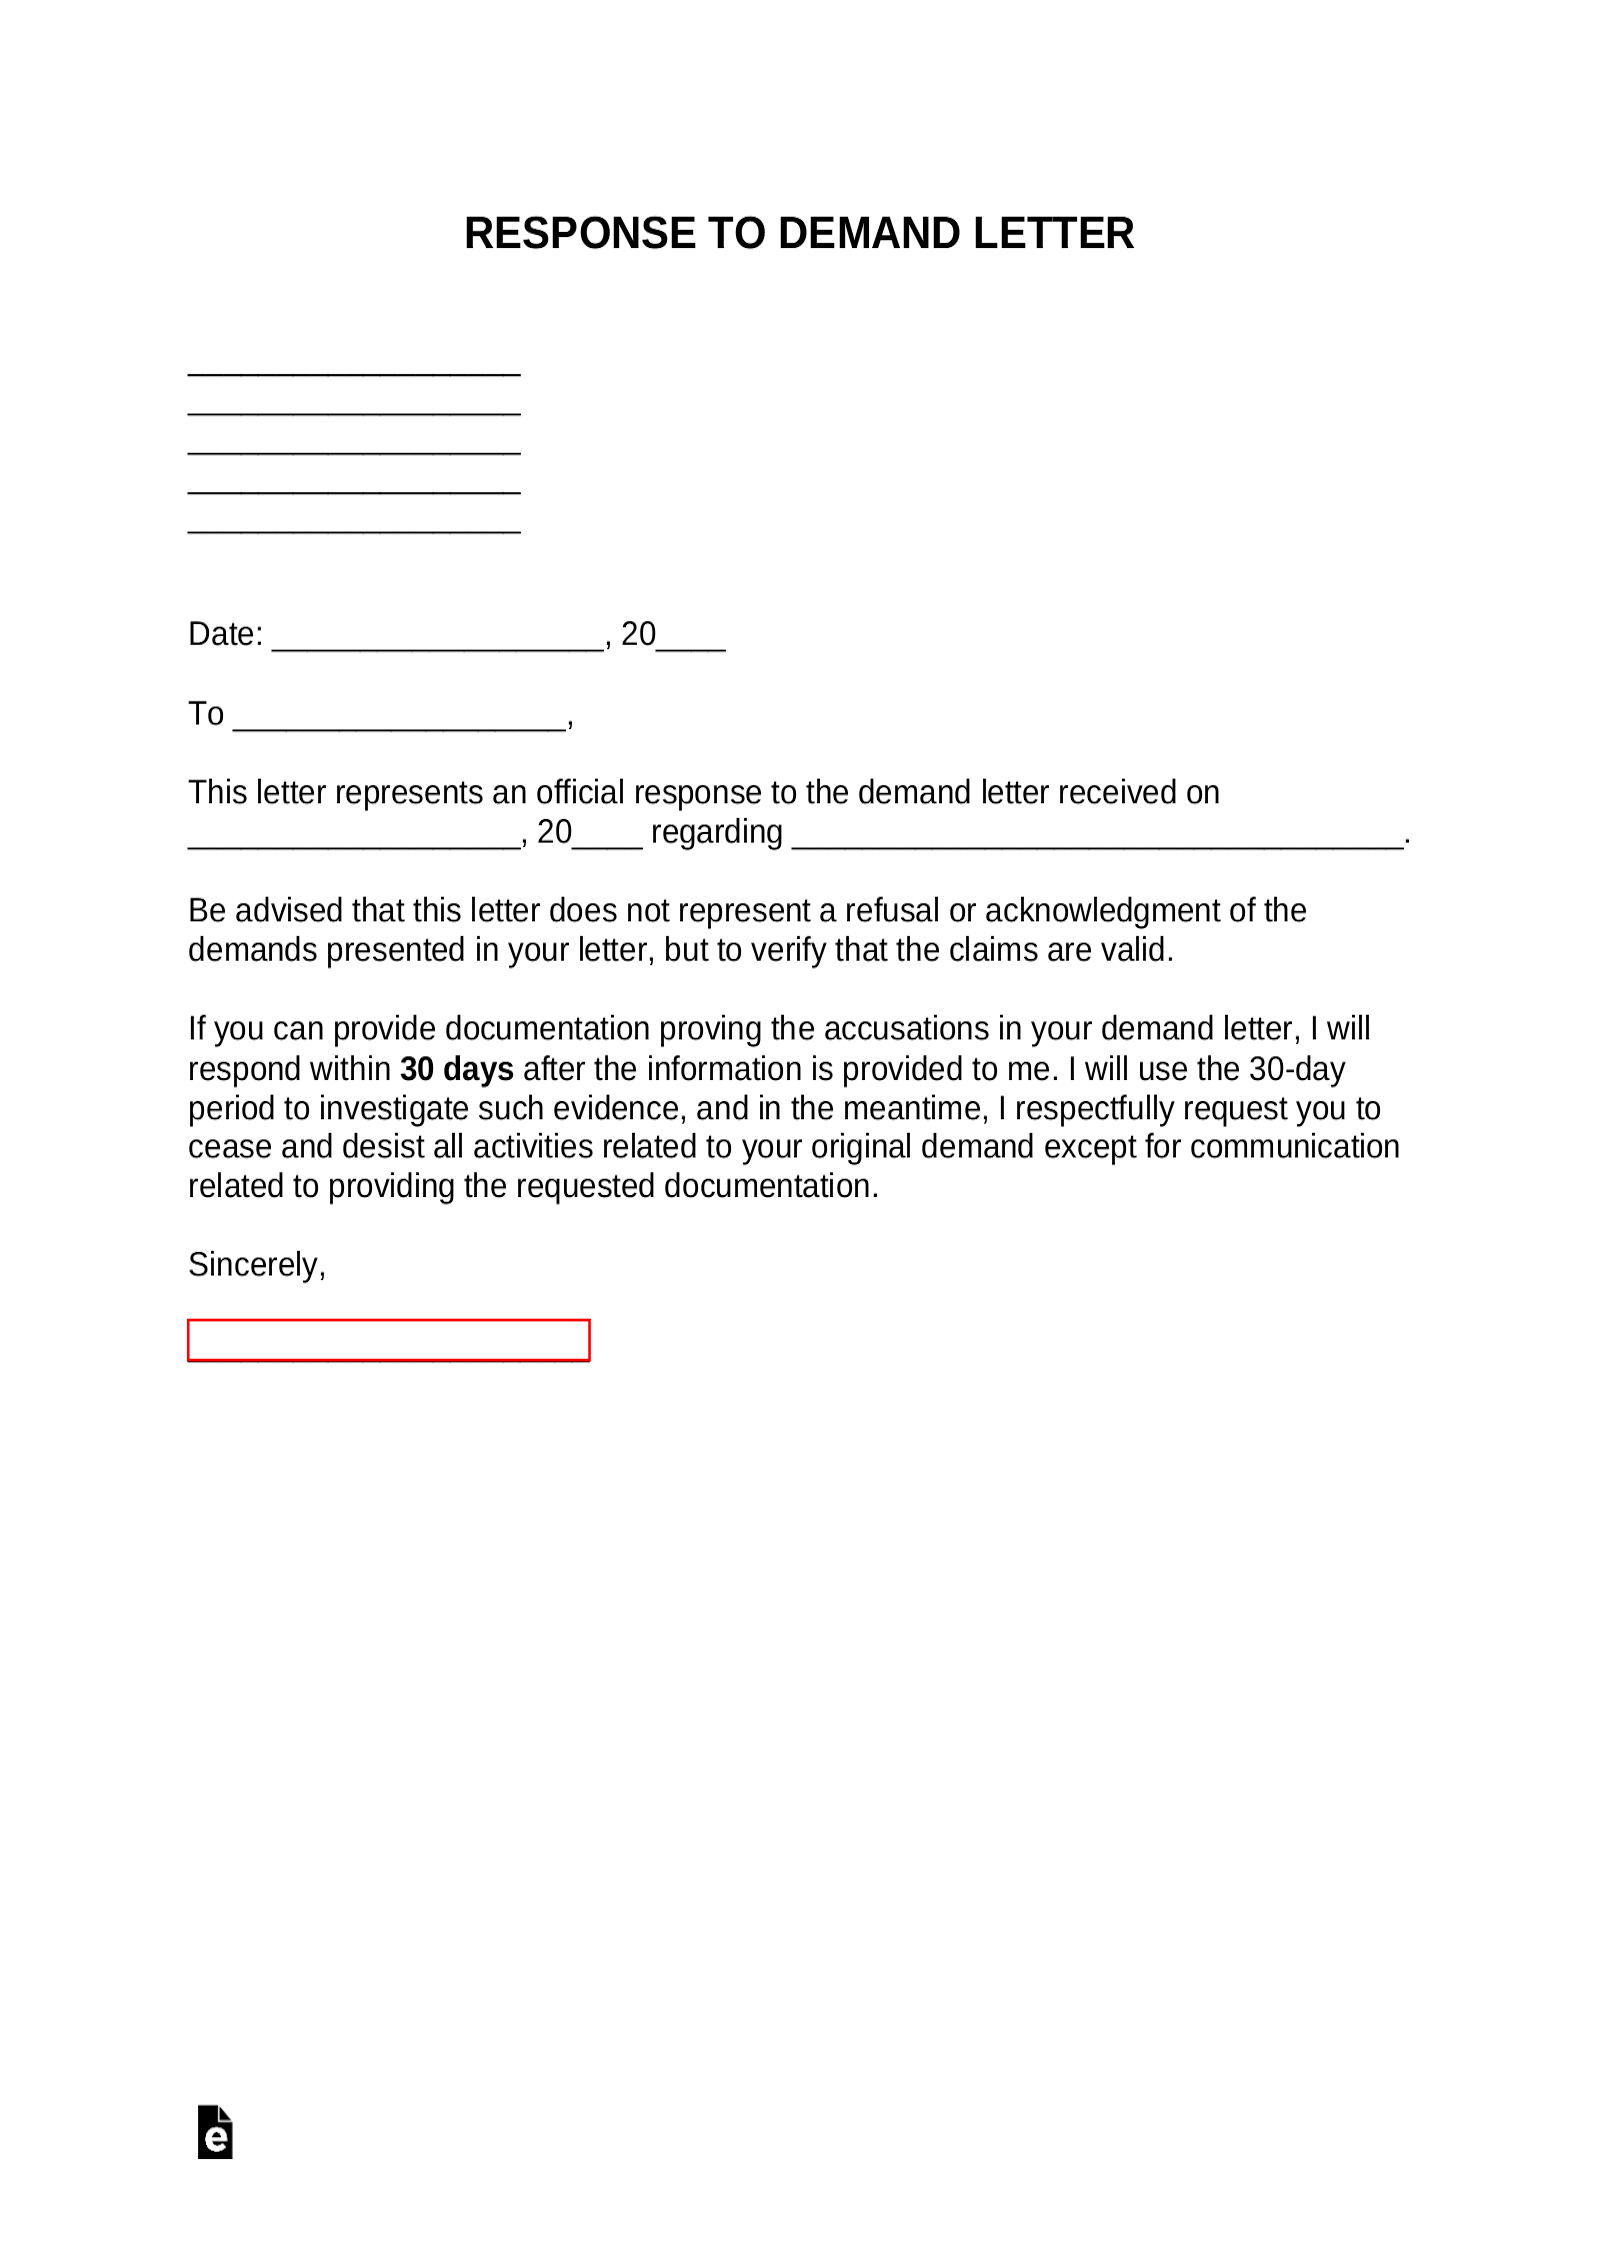 Free Response to Demand Letter PDF Word eForms